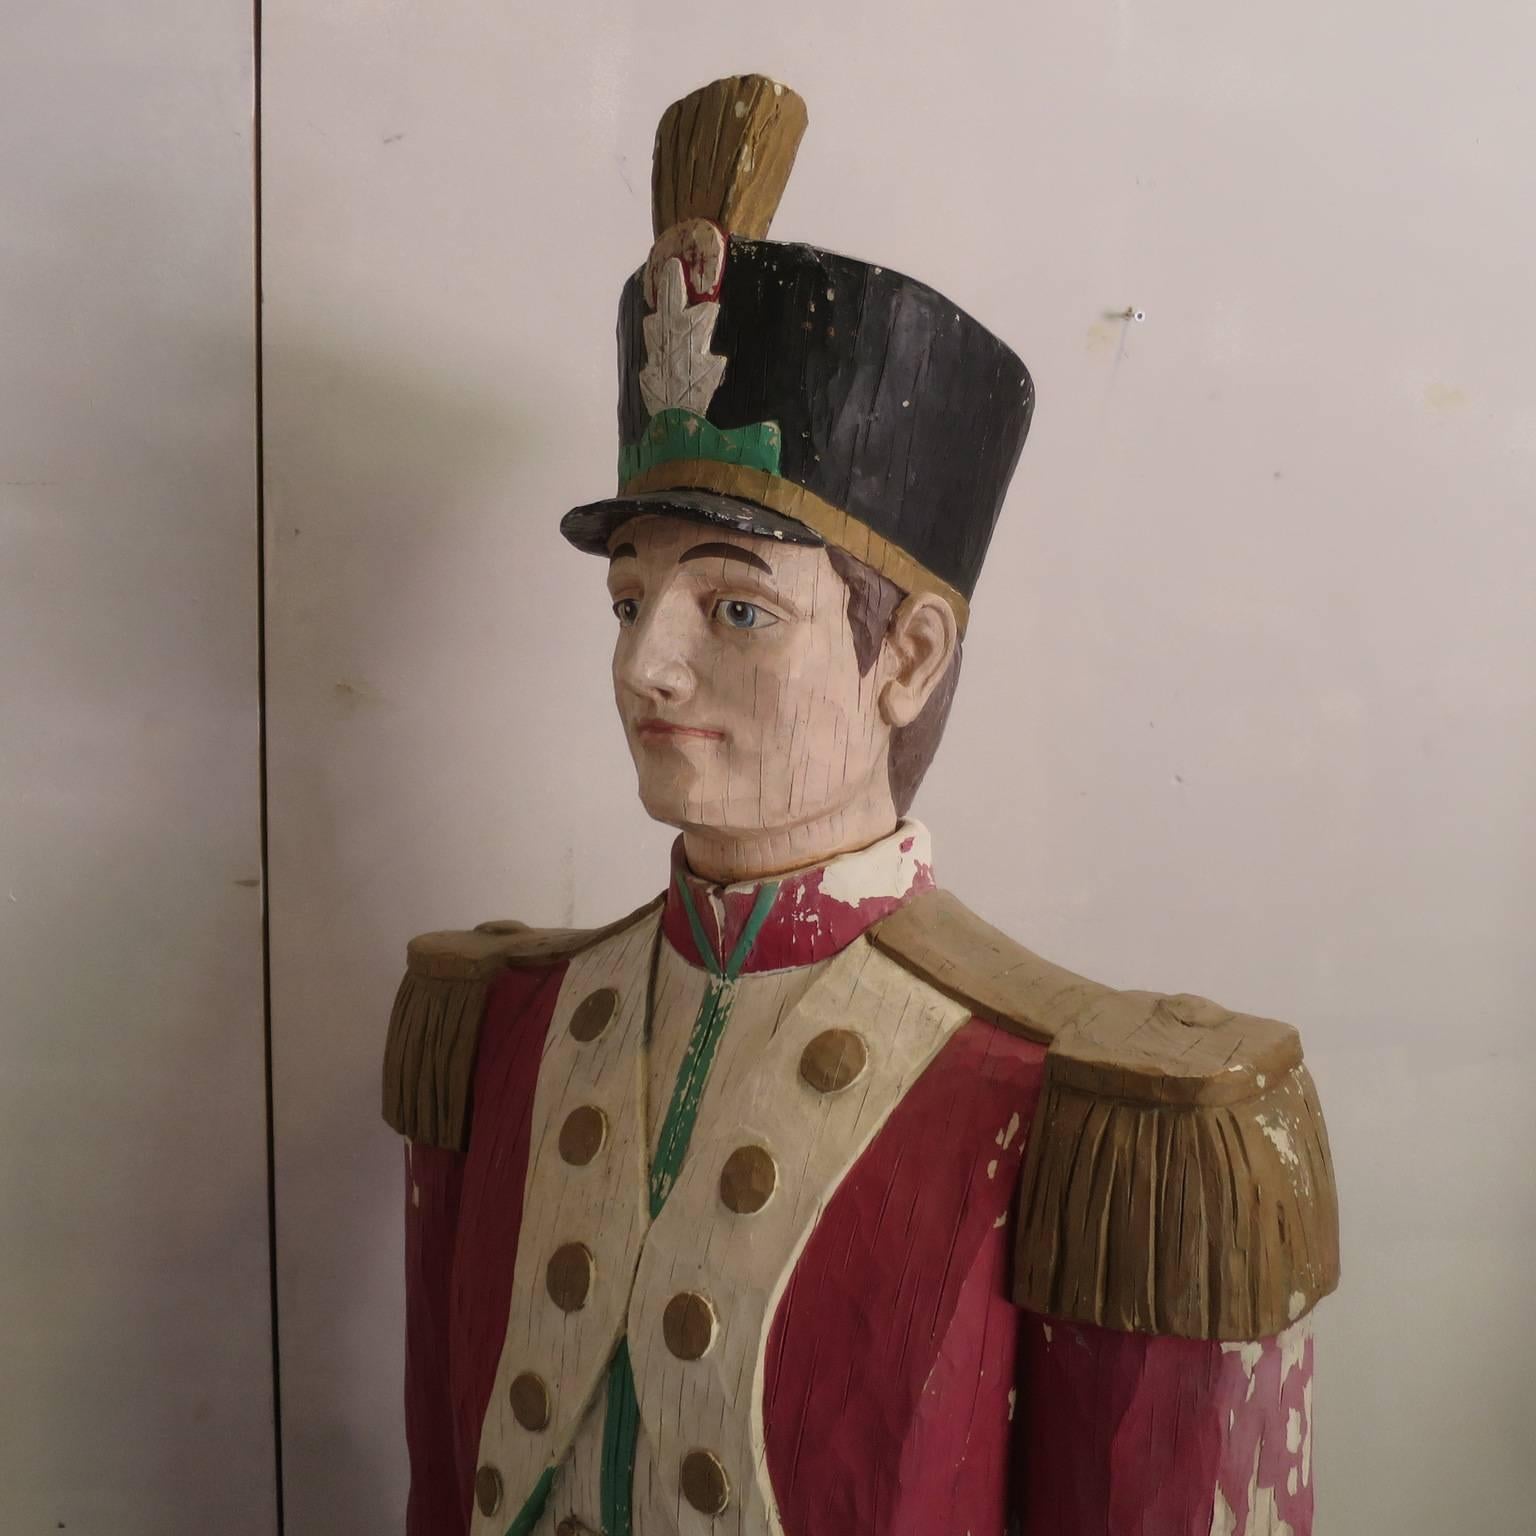 Unusual sculpture imitation wood carving work, representing two military guards wearing a very elegant uniform.
The faces are pleasant, the design and the colors of the uniforms are very interesting.
The restauration could be more detailed, but the